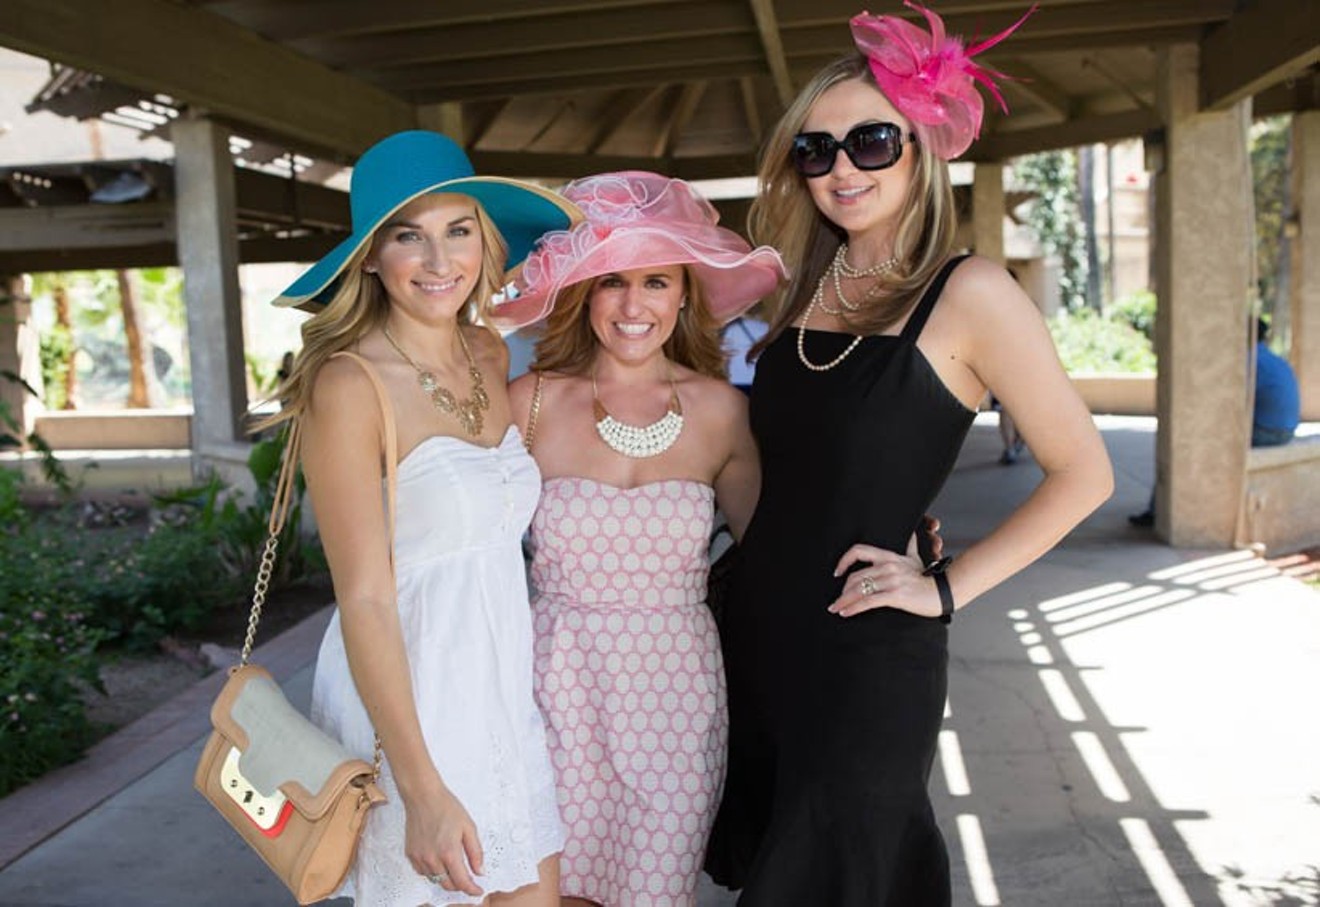 Celebrate the running of the Kentucky Derby at venues across the Valley.